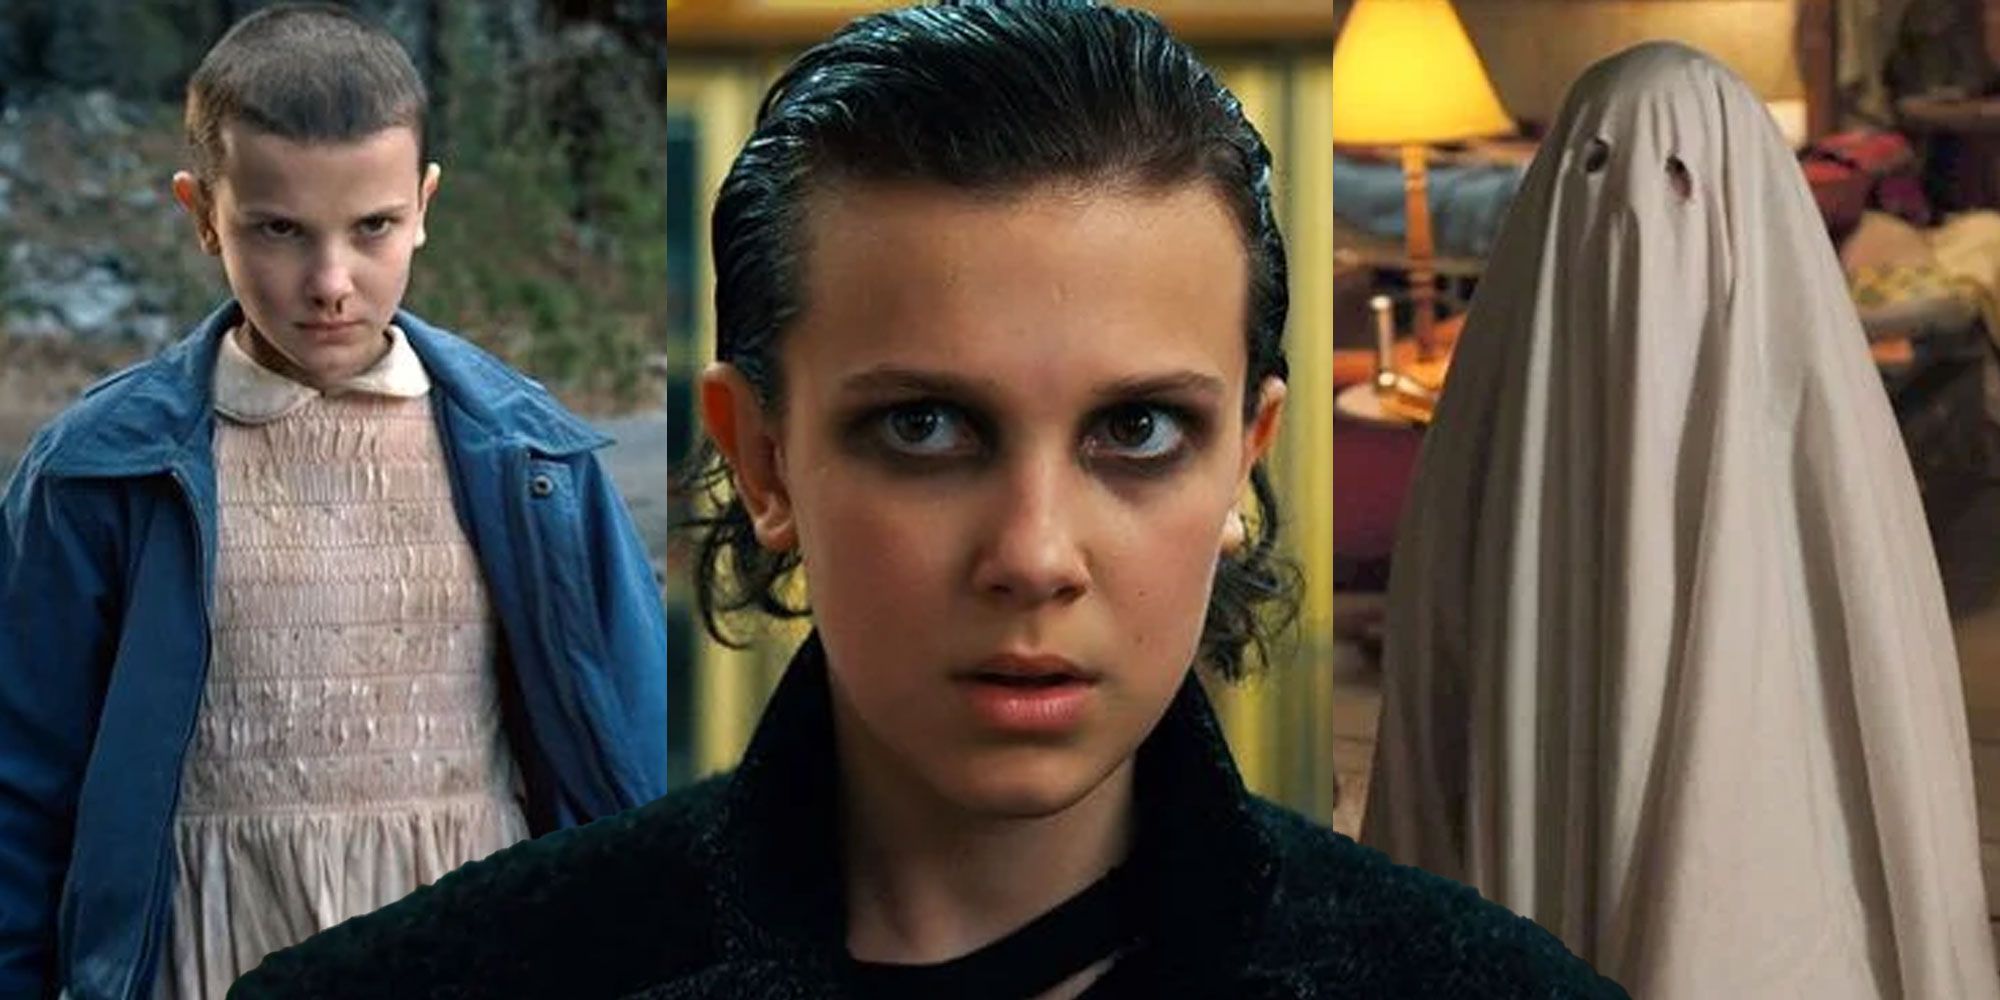 A blended image features Eleven in Stranger Things